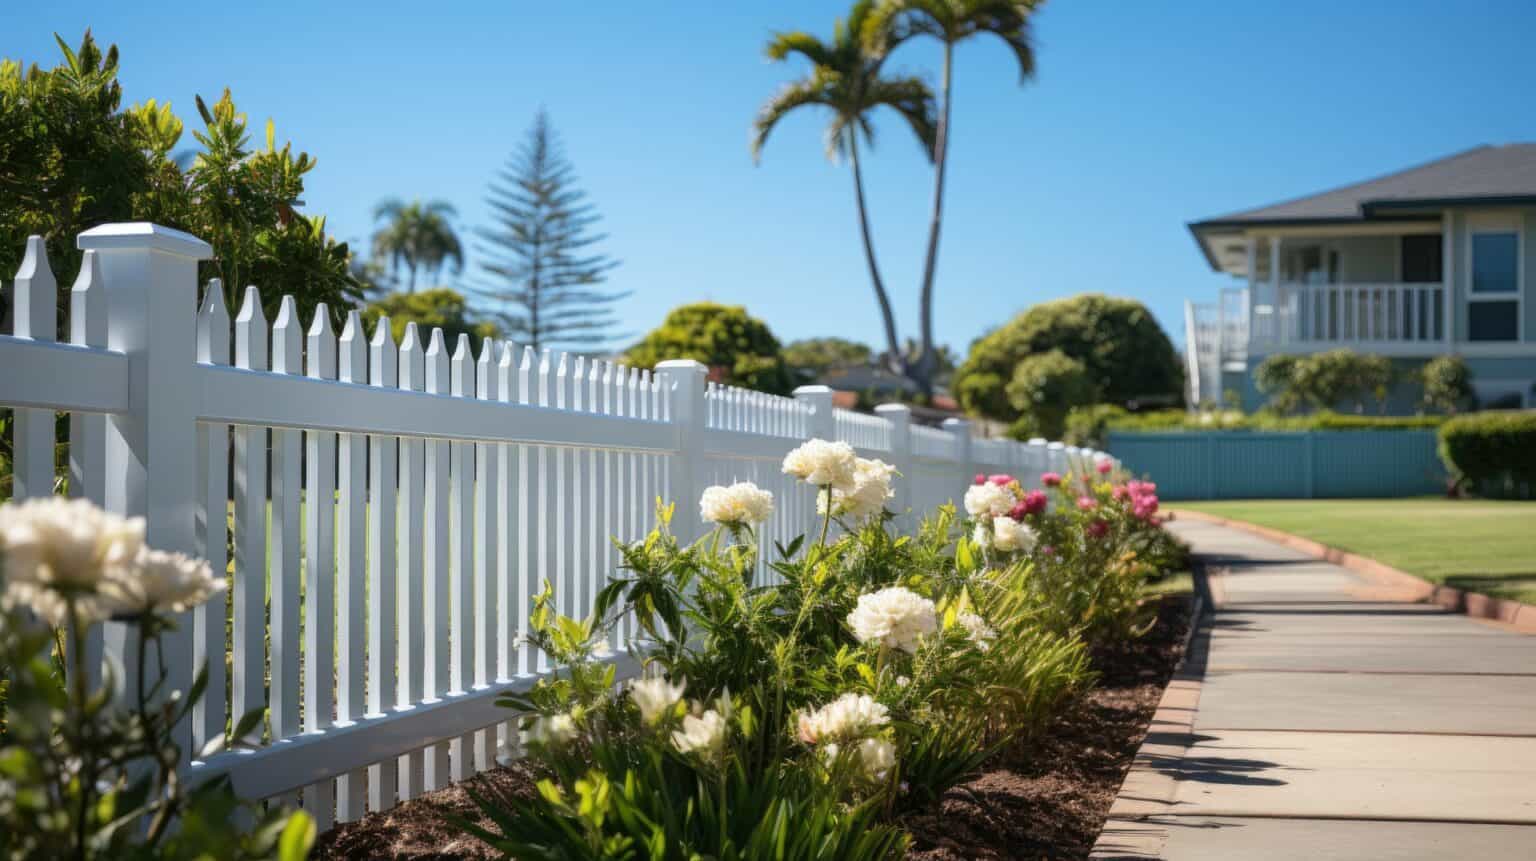 Vinyl picket fence bordering front lawn with trees and small bushes and separating it from concrete sidewalk